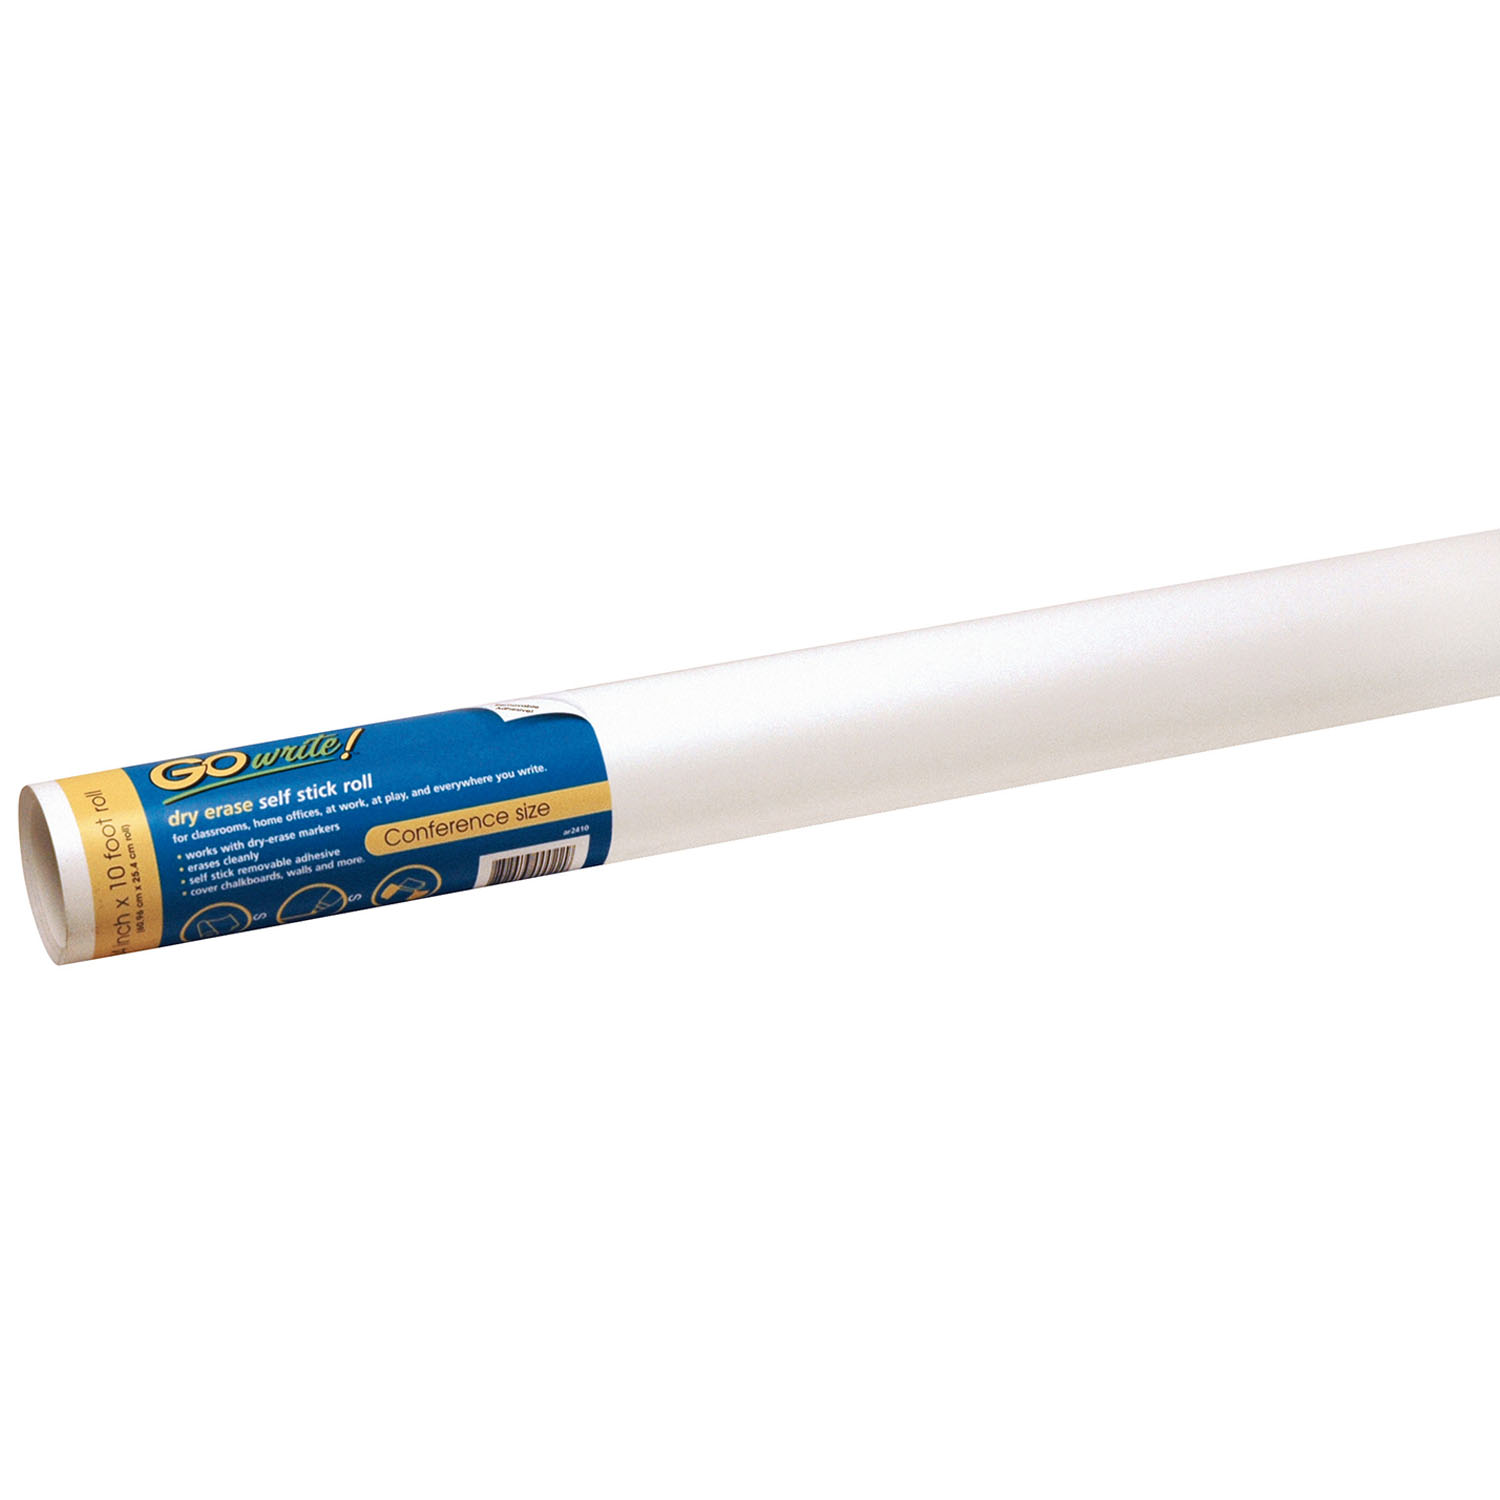 GoWrite!® Dry-Erase Roll